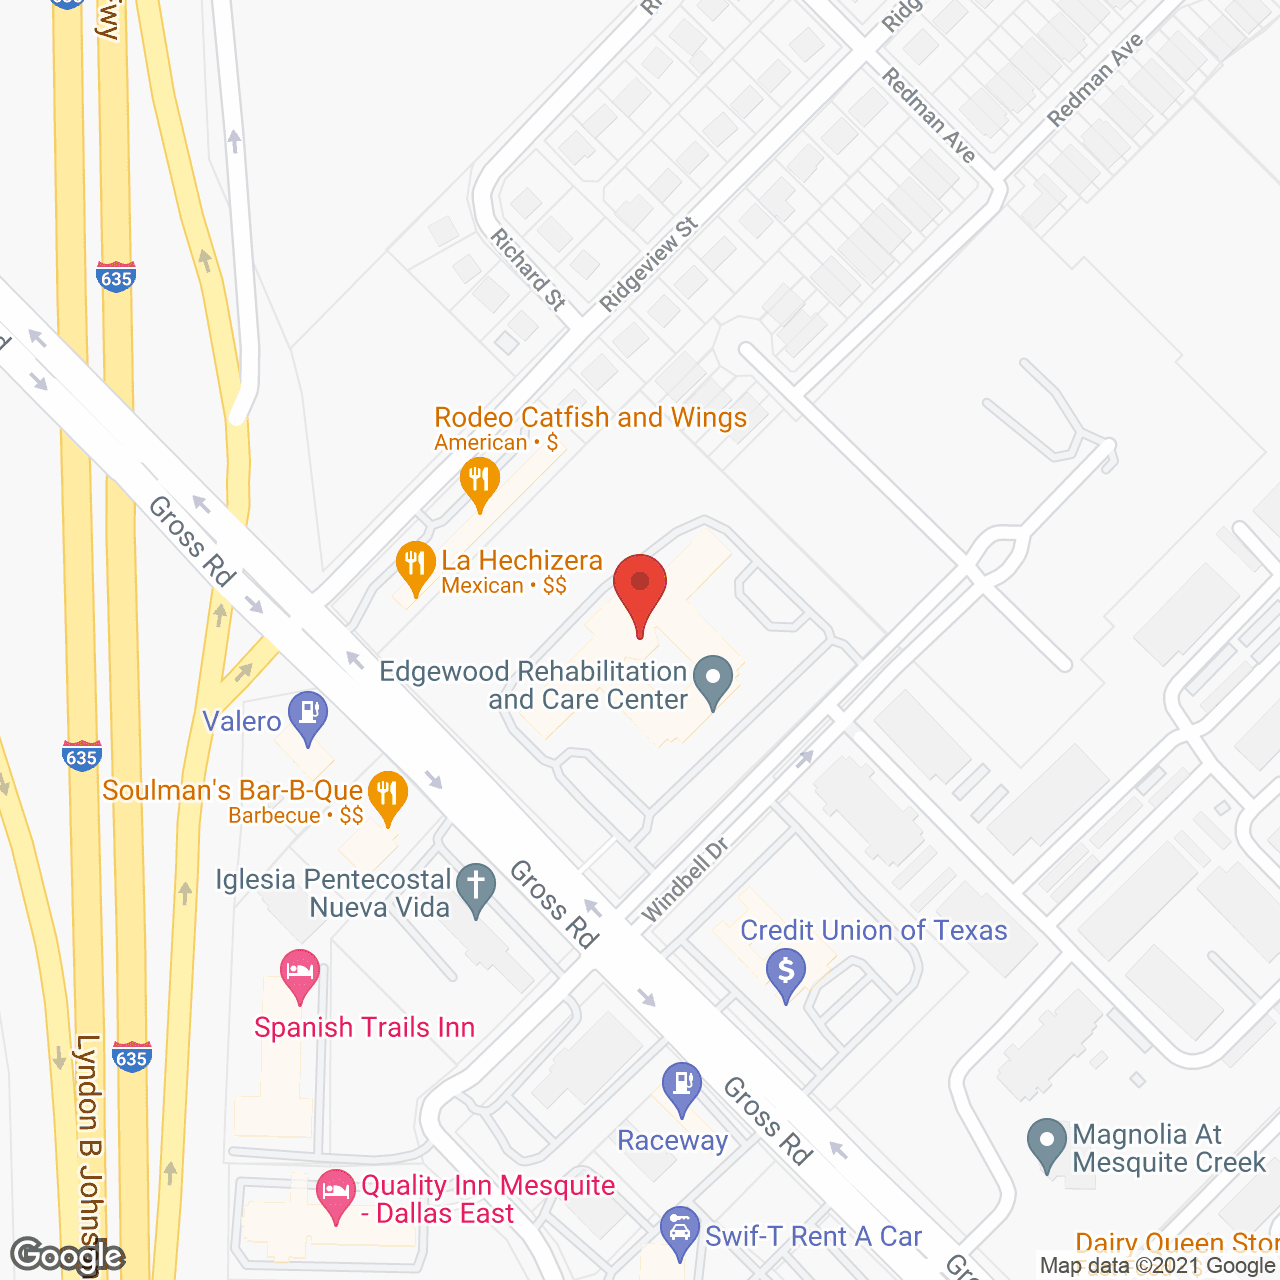 Edgewood Rehabilitation and Care Center in google map